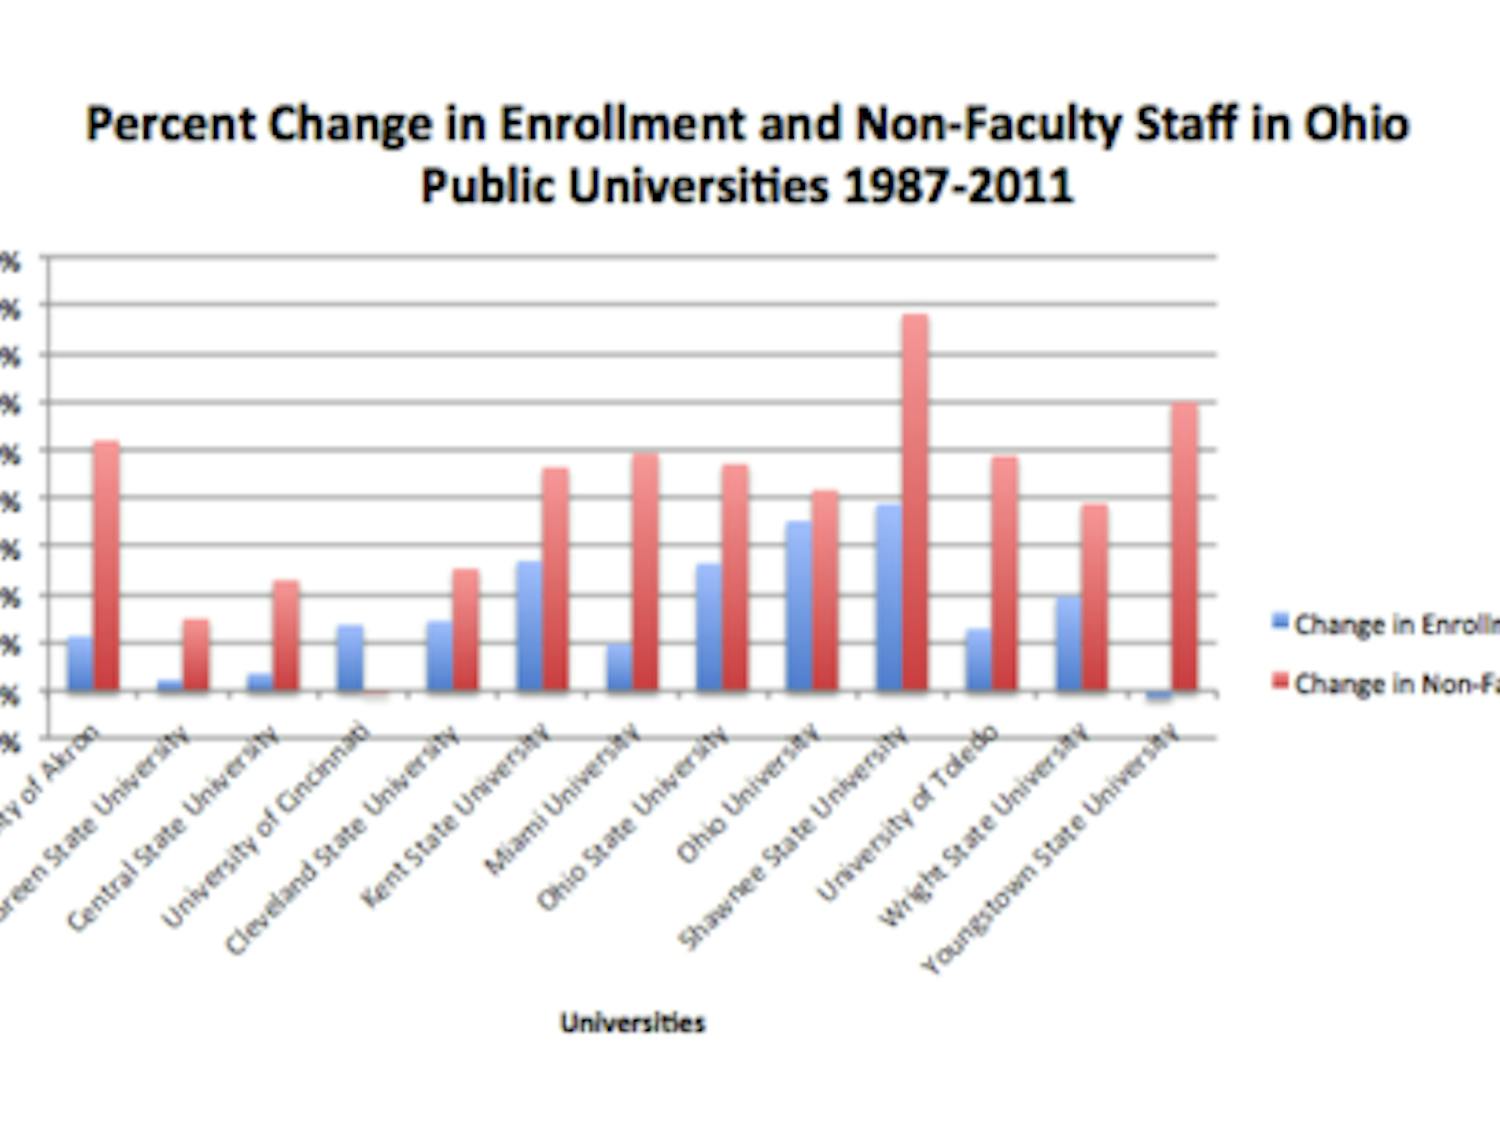 Percent change in enrollment and non-faculty staff in Ohio public universities from 1987-2011  